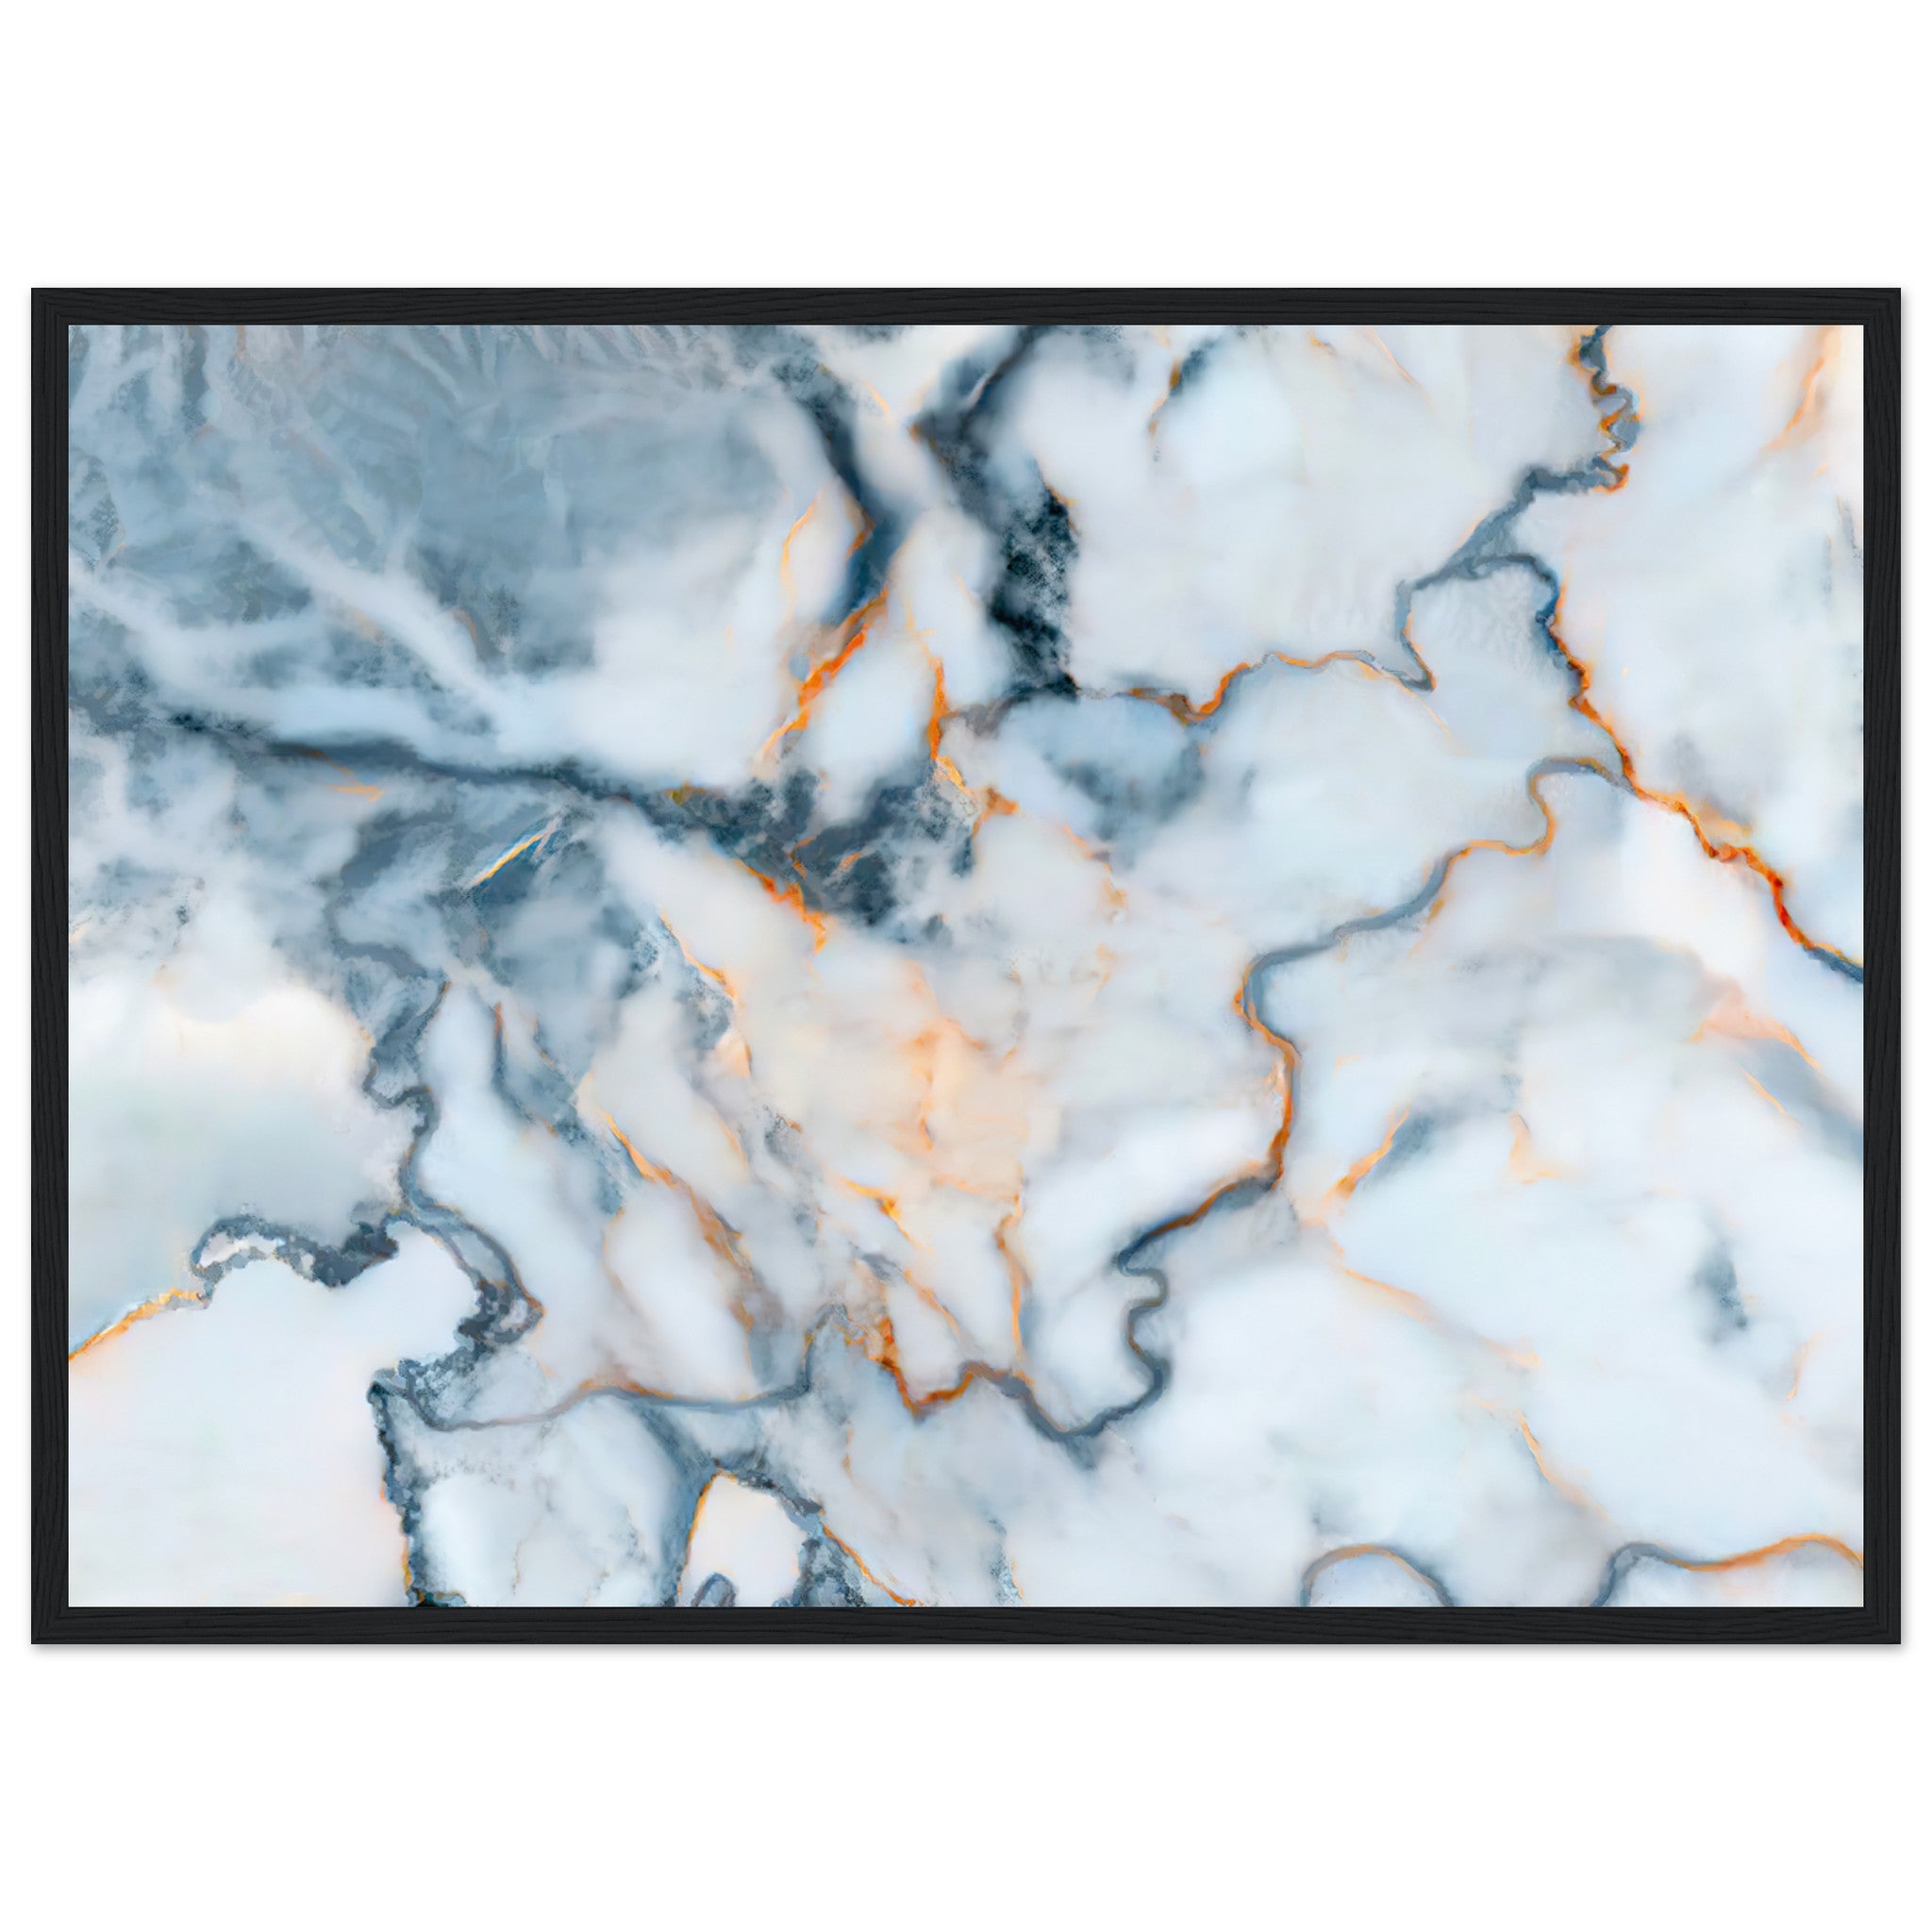 Slovenia Marble Map Poster